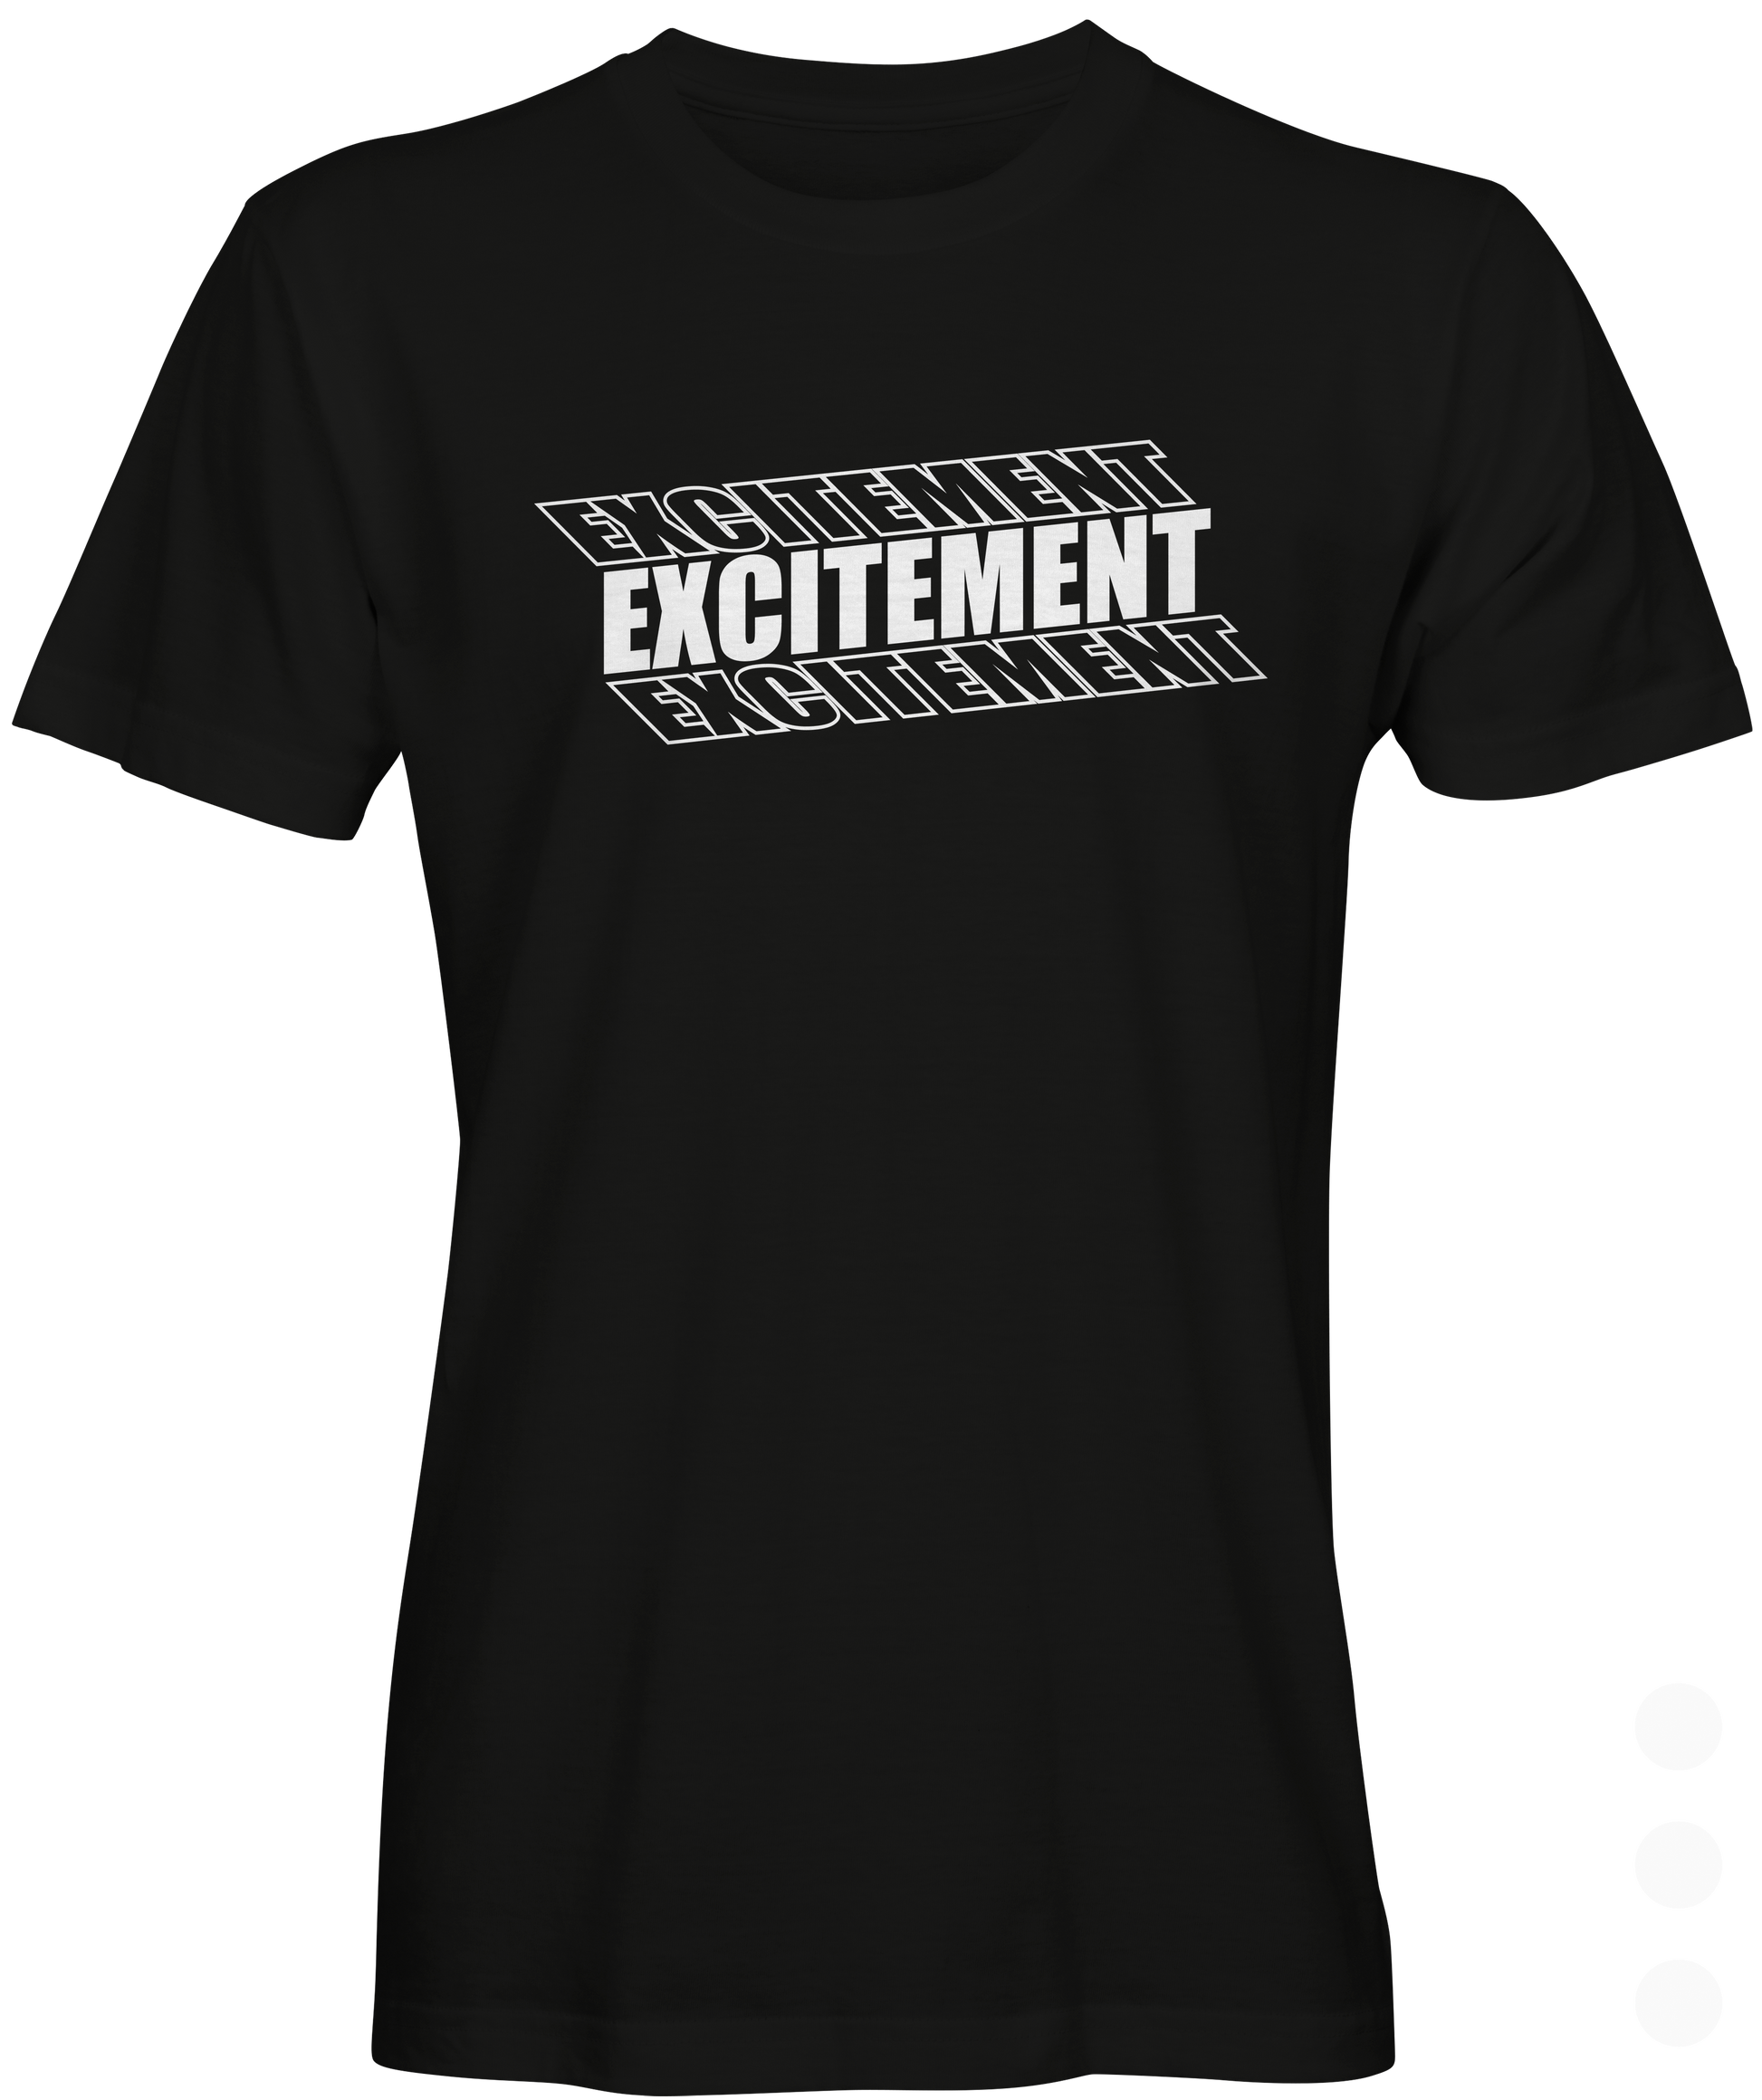 Excitement Graphic T-shirt